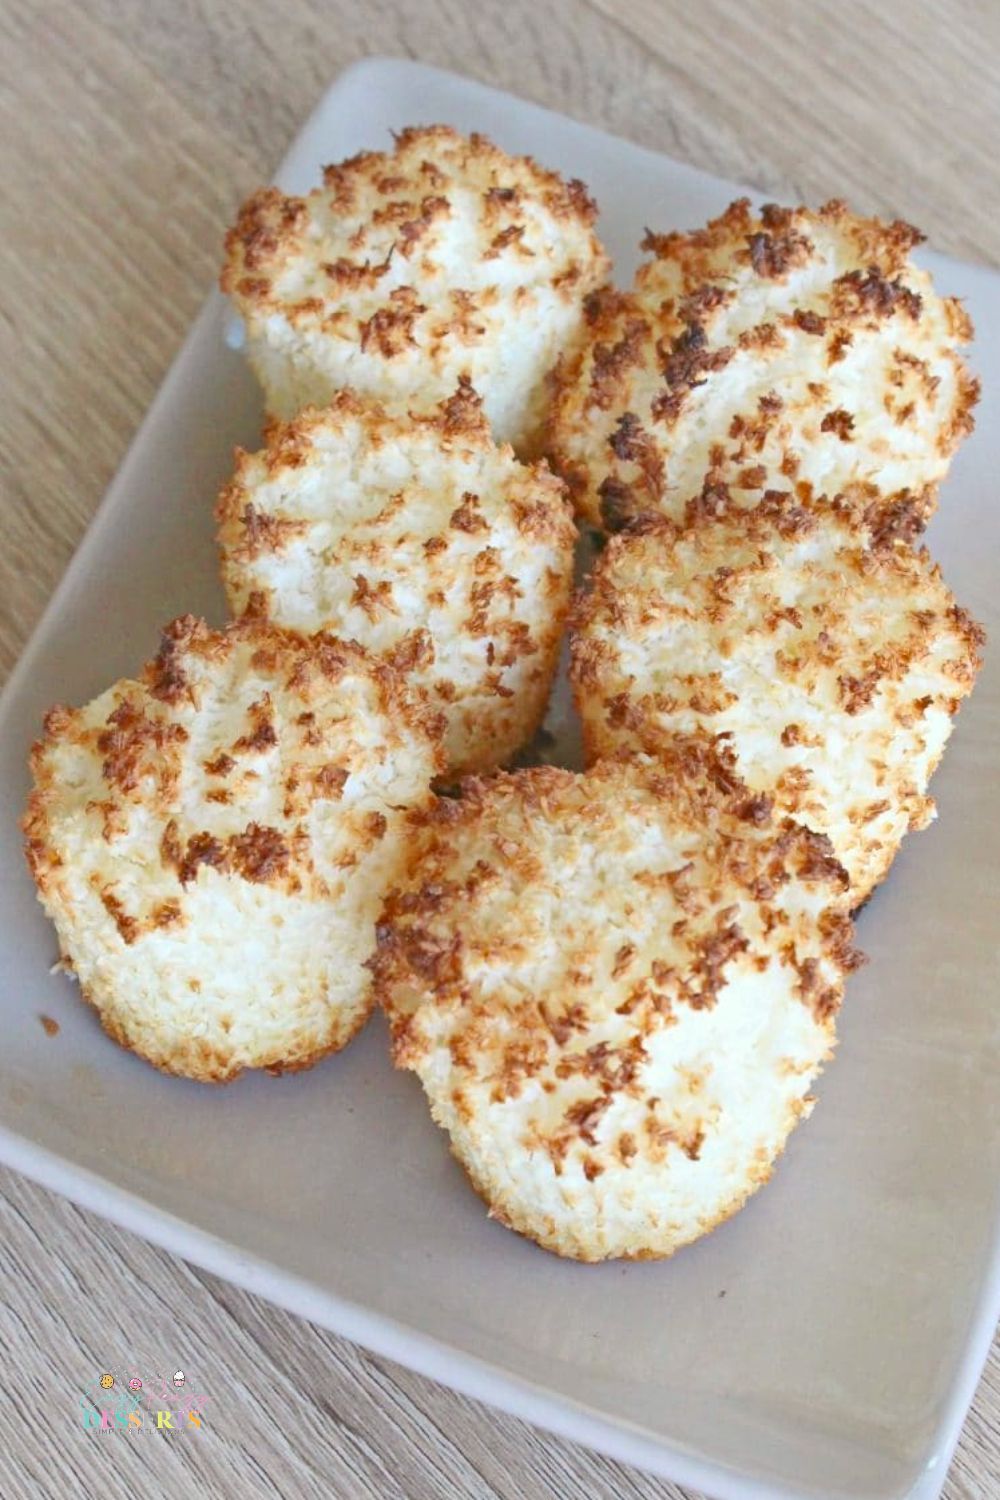 Image of coconut macaroons baked in muffin pan